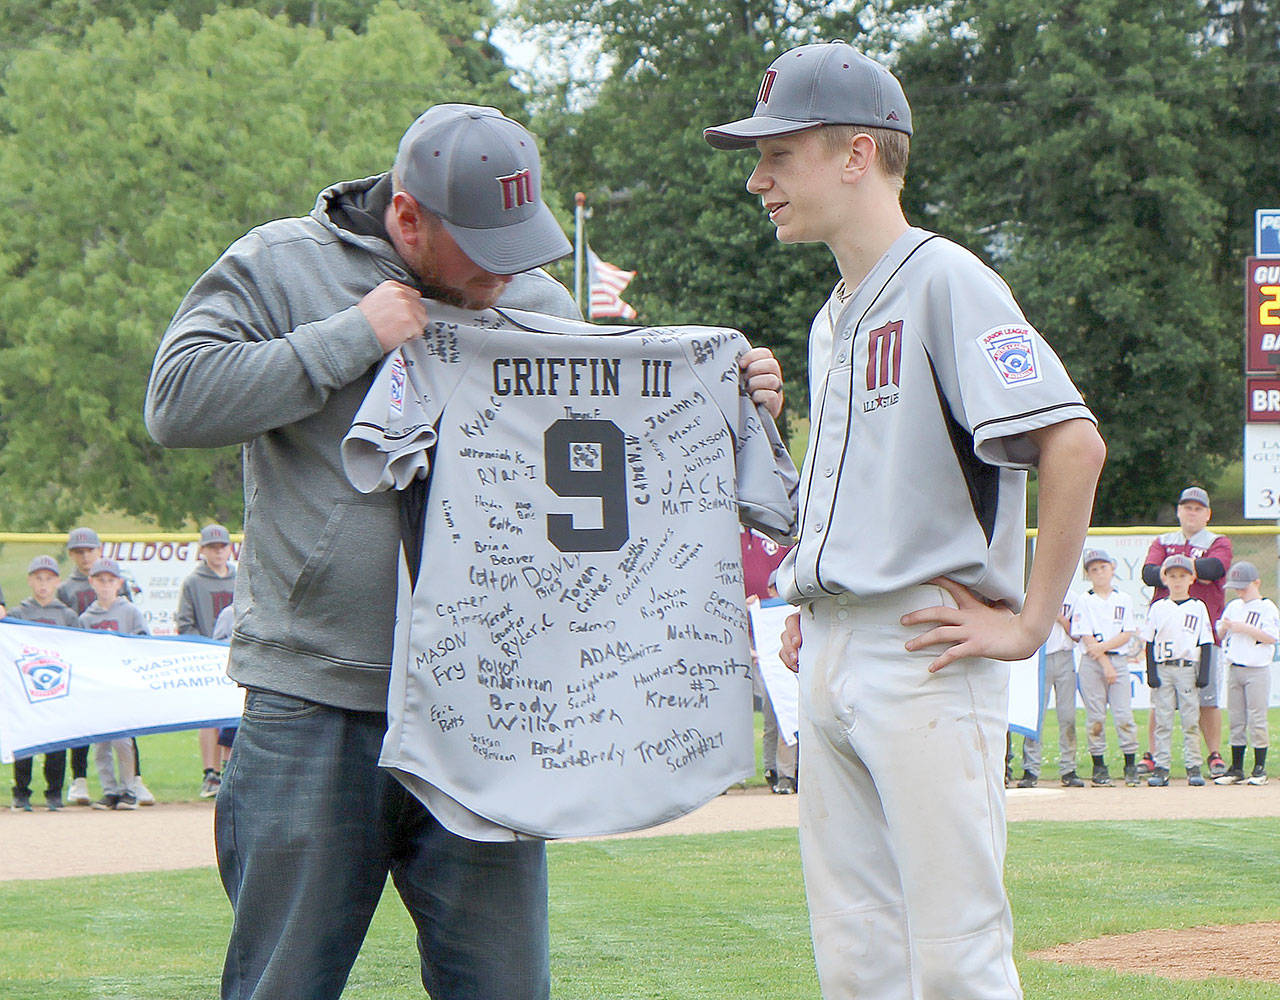 John Griffin (right) is presented a jersey autographed by fellow Little League baseball players.